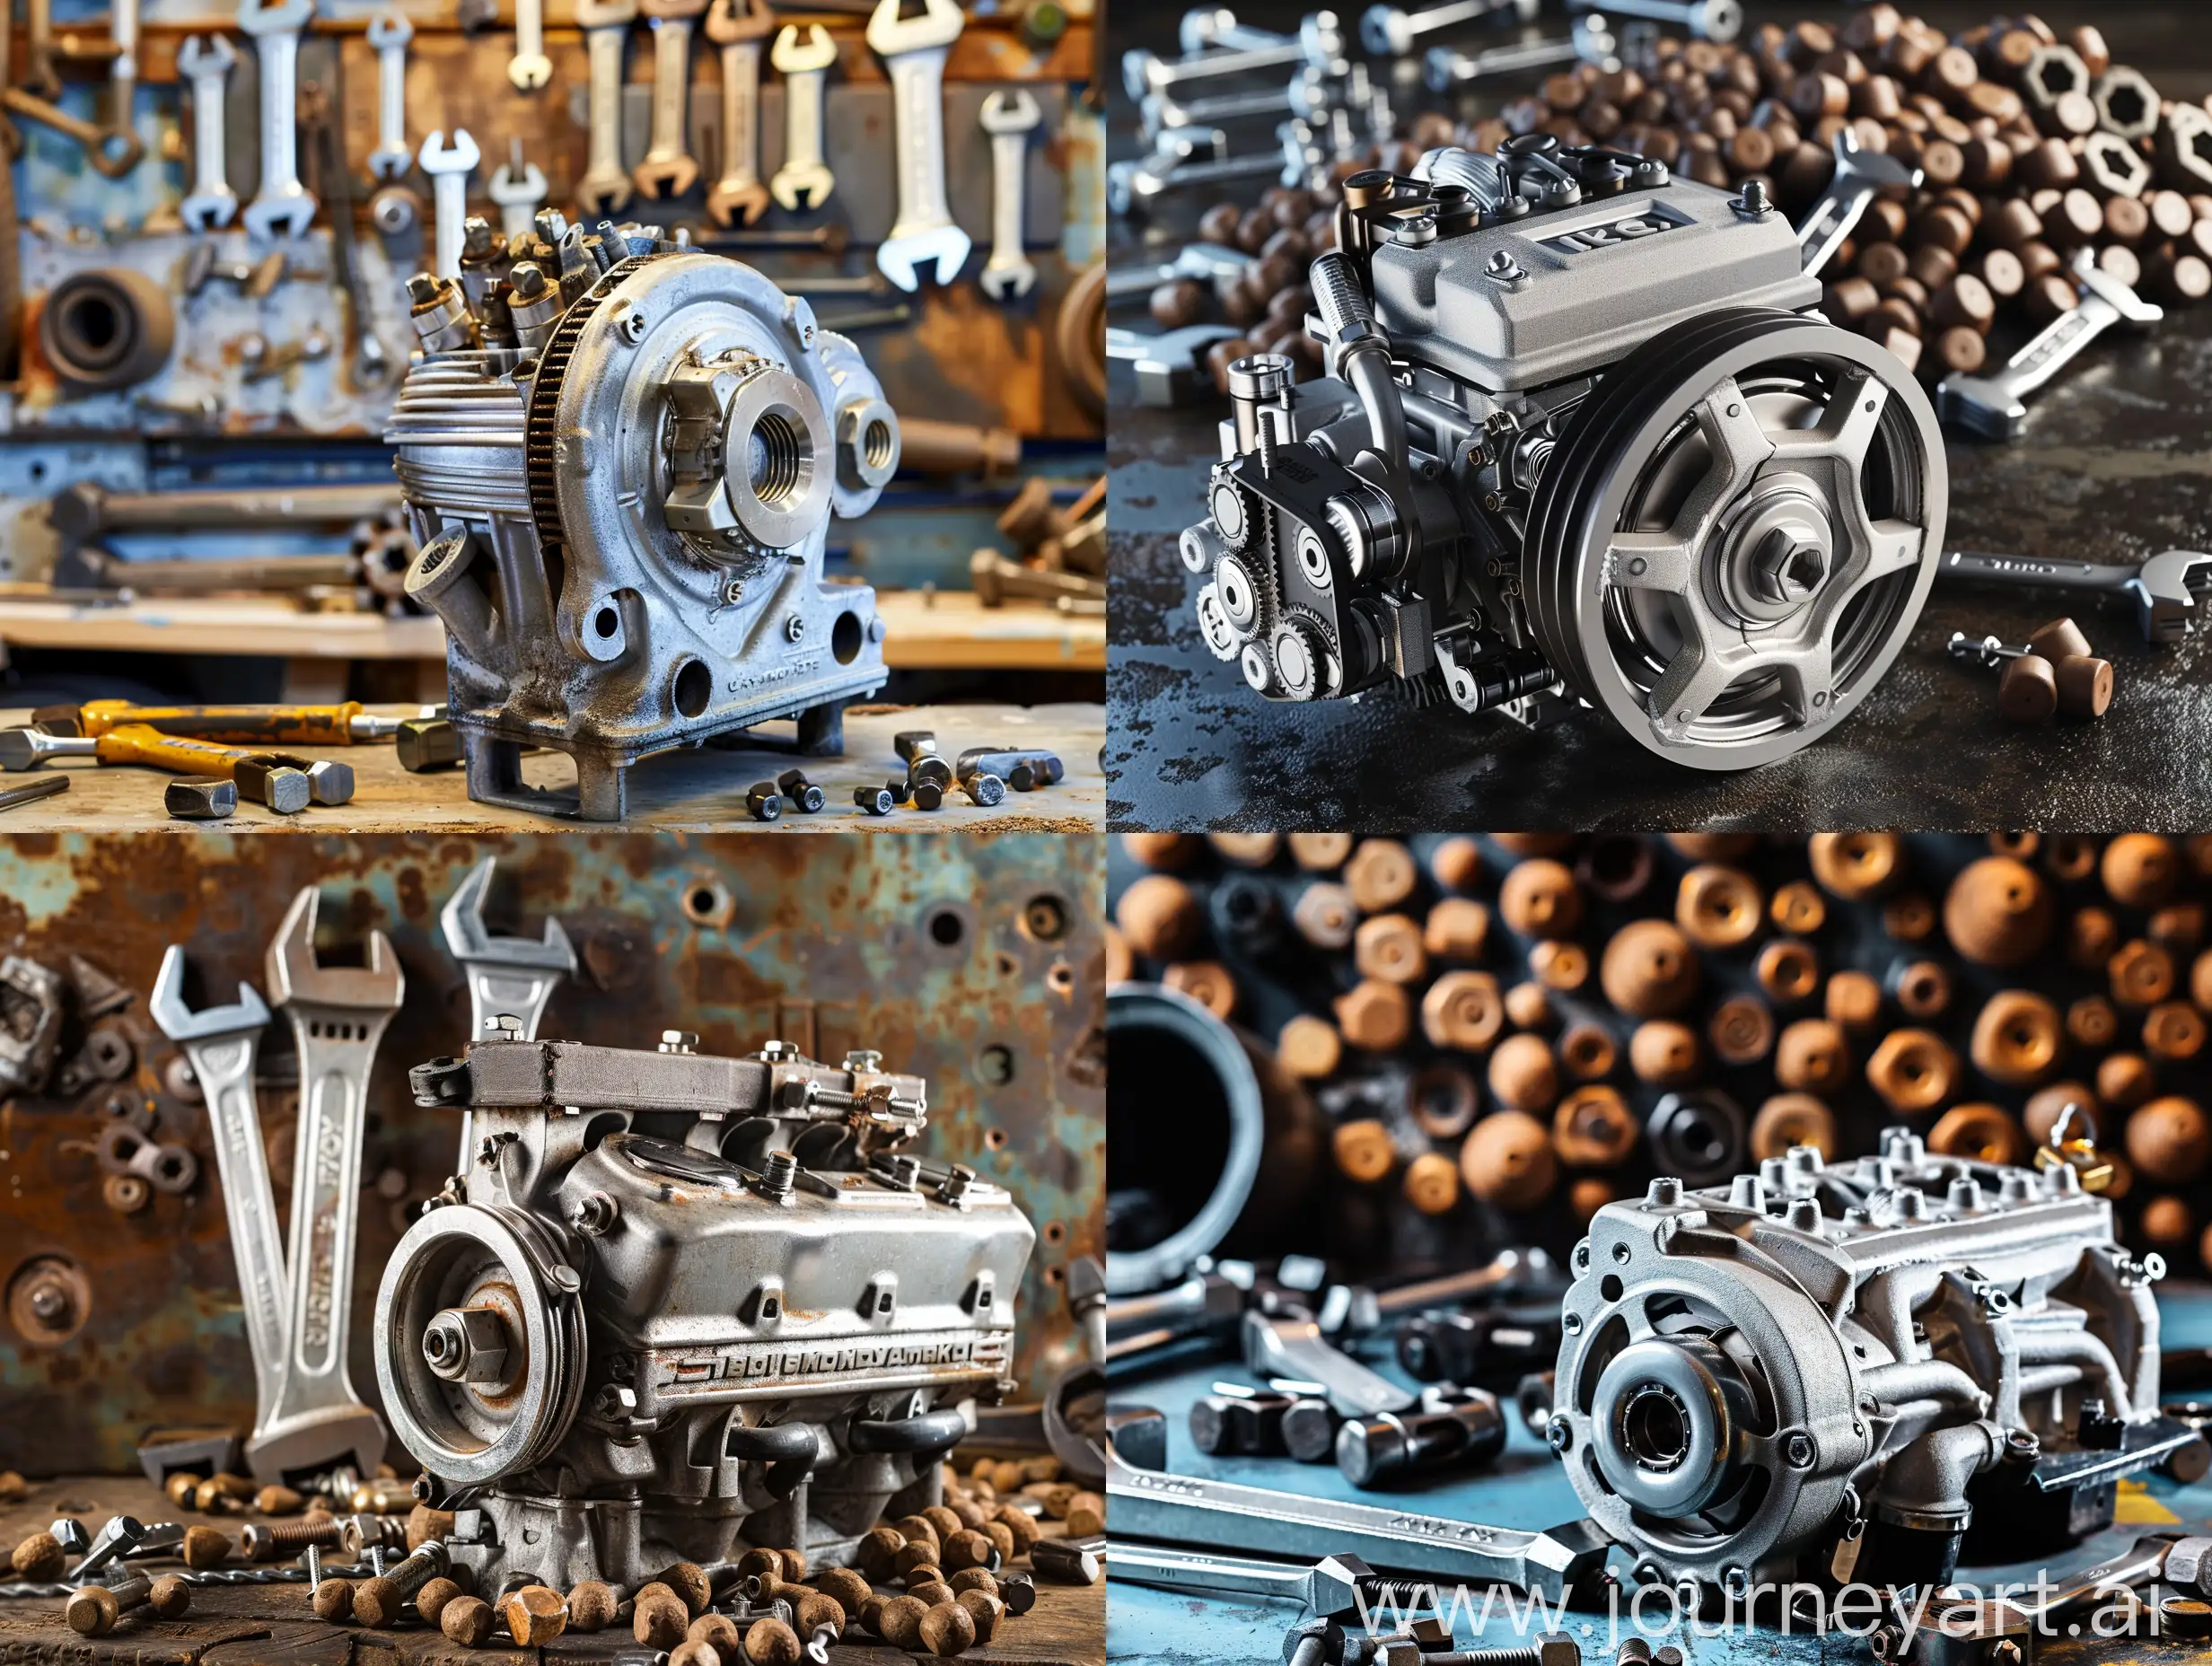 Mechanical-Engine-surrounded-by-Nuts-and-Wrenches